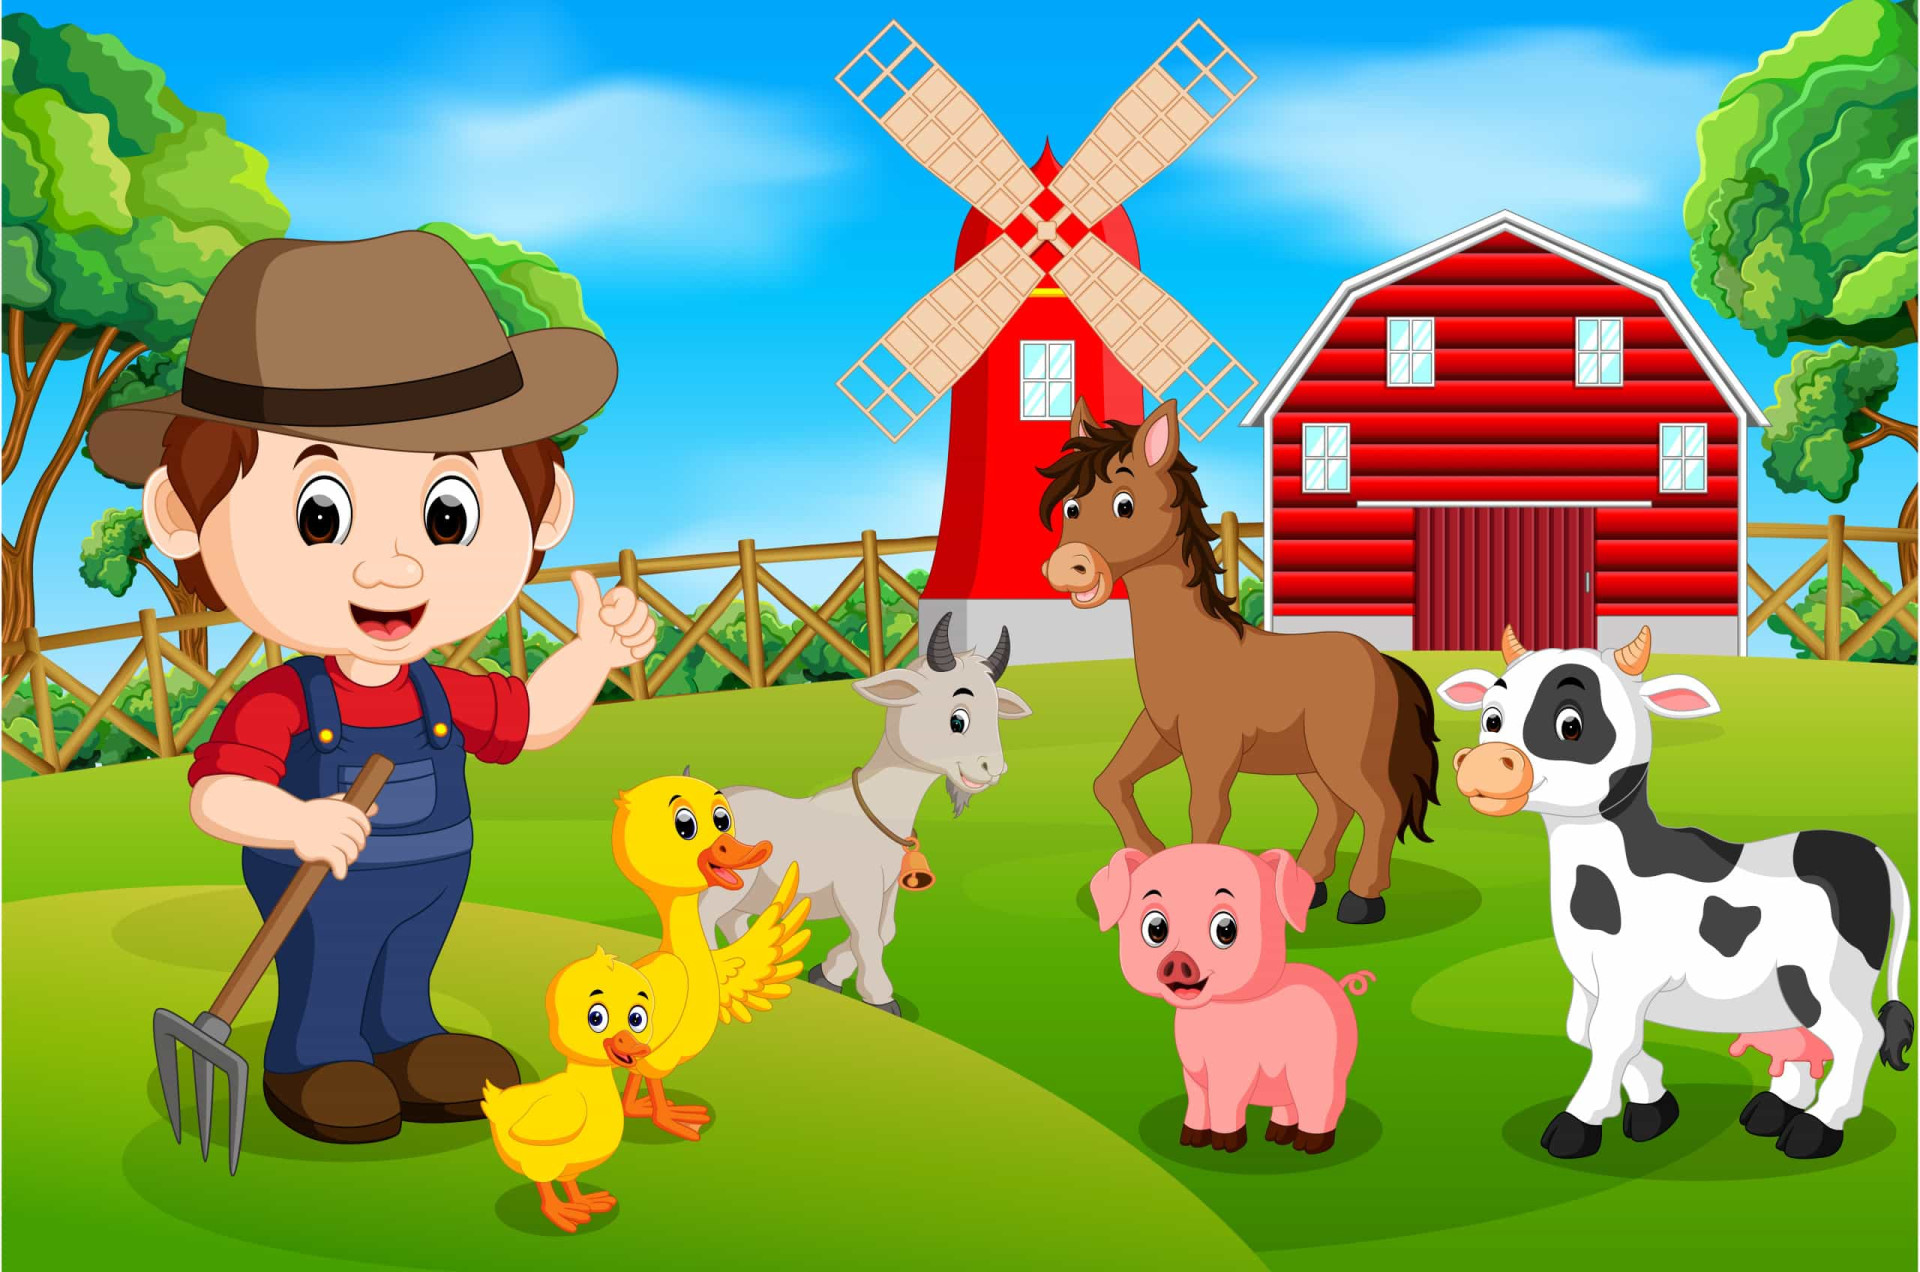 <p>Does your kid dream of being a farmer when they grow up? This nursery rhyme will check all the boxes. </p><p><a href="https://www.msn.com/en-us/community/channel/vid-7xx8mnucu55yw63we9va2gwr7uihbxwc68fxqp25x6tg4ftibpra?cvid=94631541bc0f4f89bfd59158d696ad7e">Follow us and access great exclusive content every day</a></p>